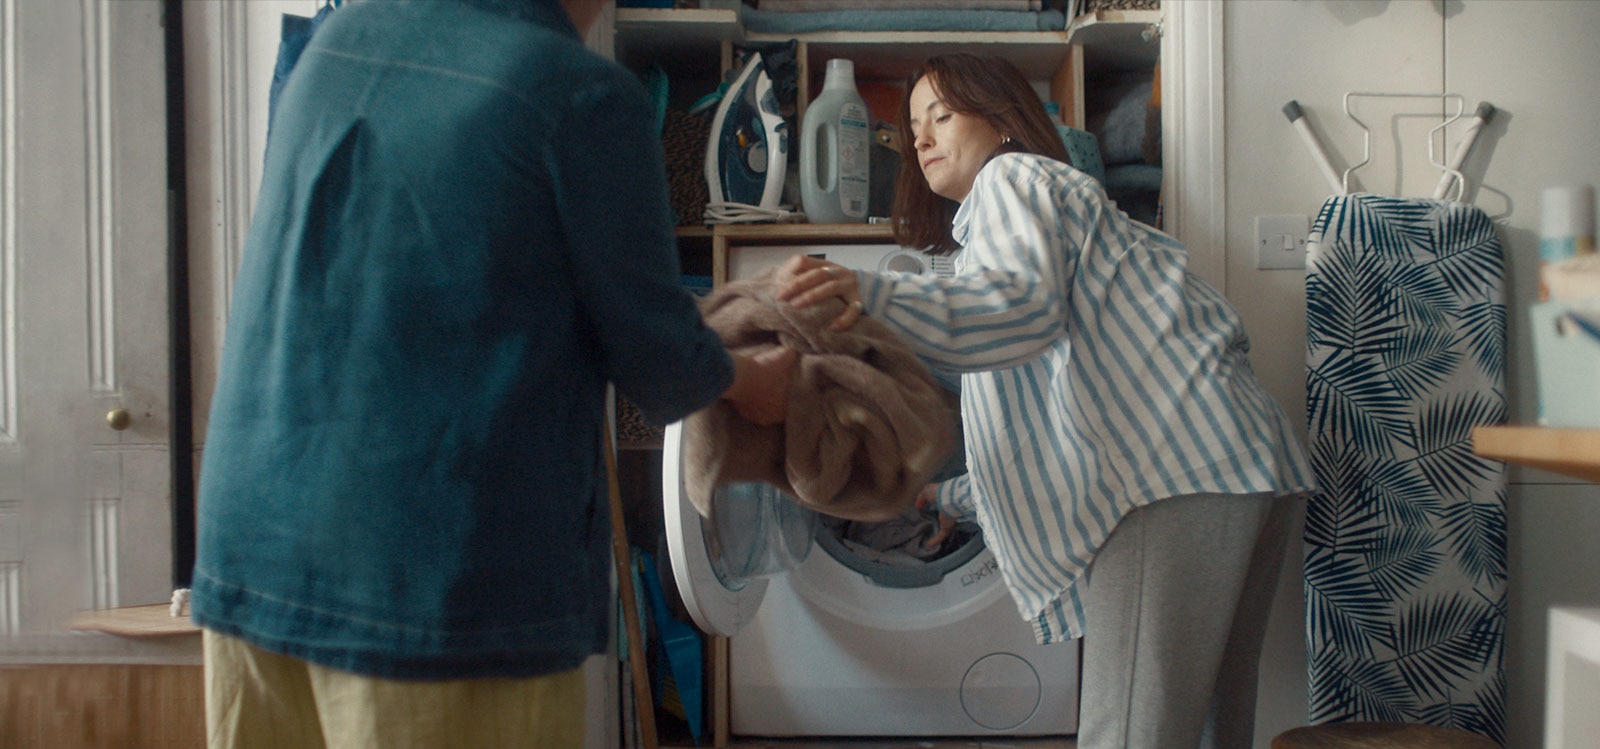 A woman removes laundry from the machine and hands it to her mum.